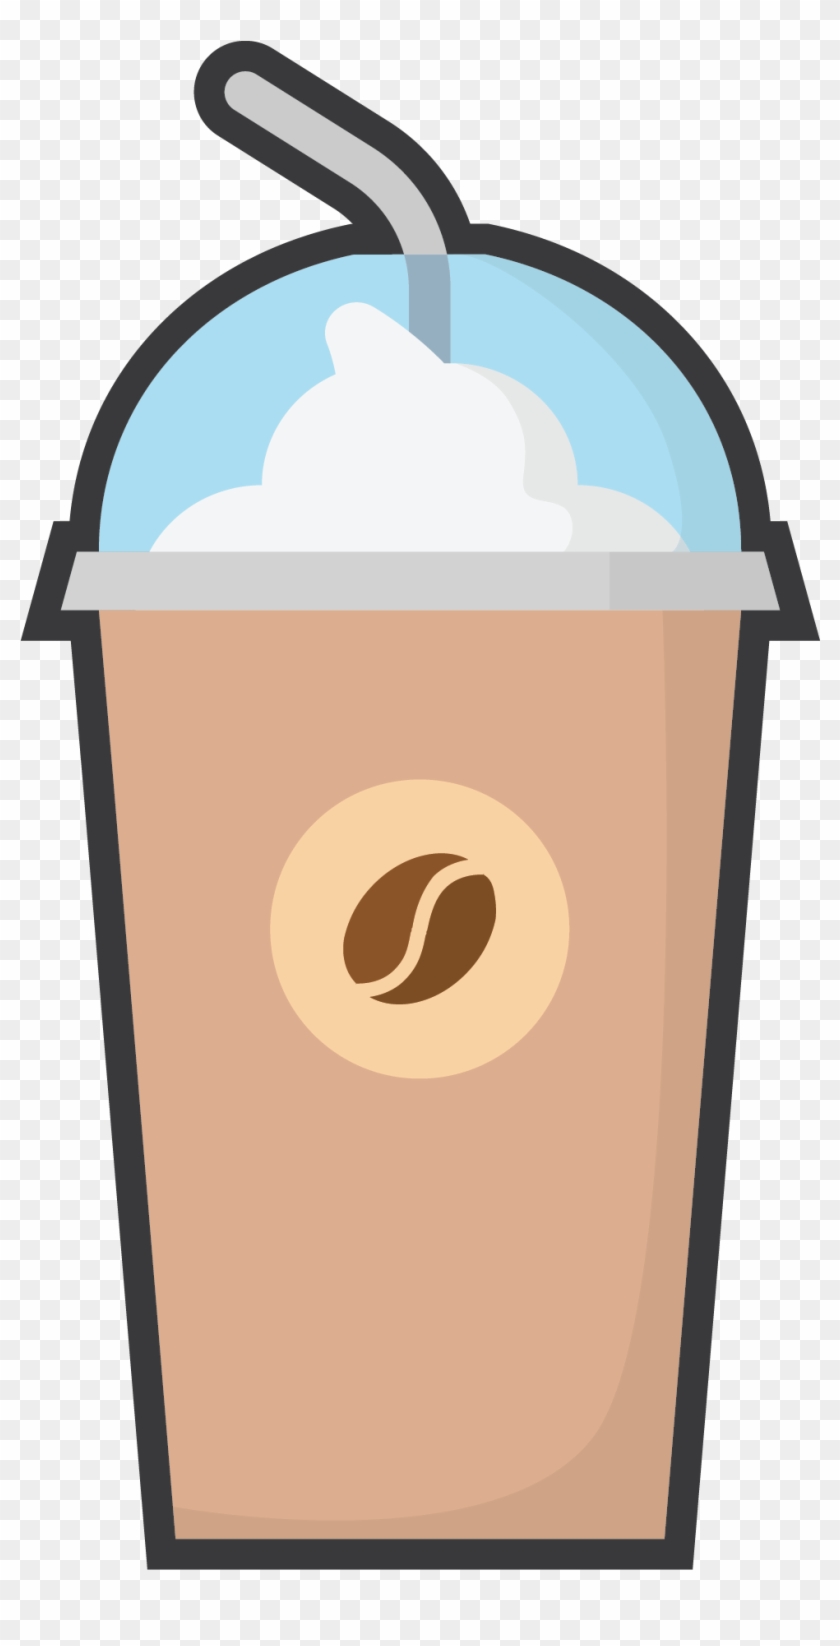 Frappe W/ Whipped Cream - Frappe Clipart Png #1739715